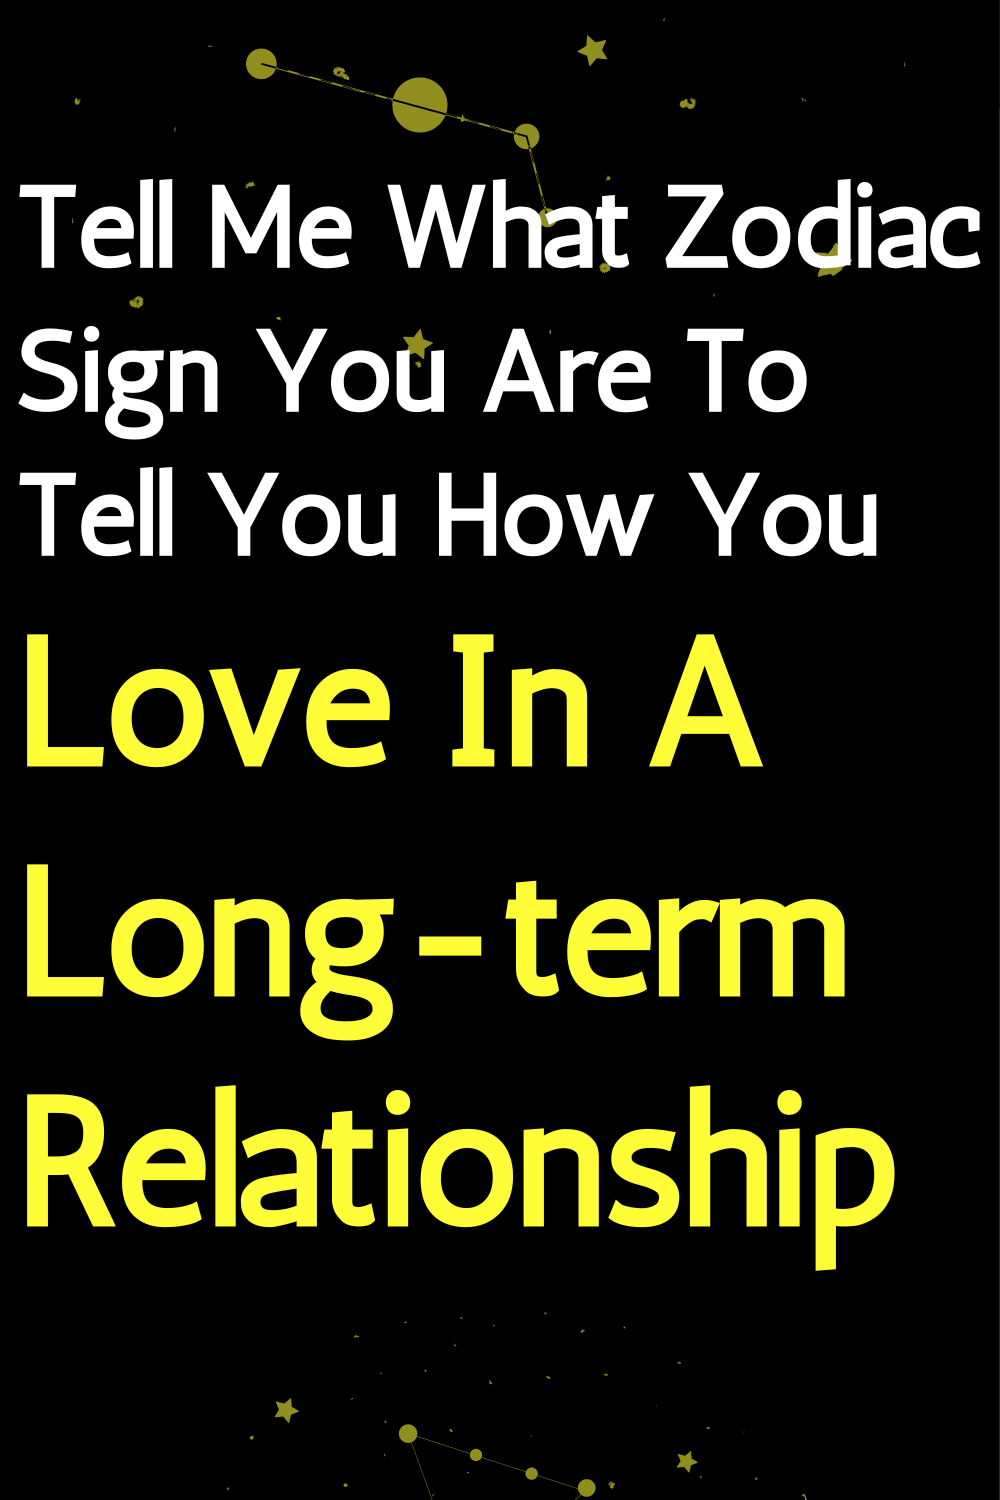 Tell Me What Zodiac Sign You Are To Tell You How You Love In A Long-term Relationship